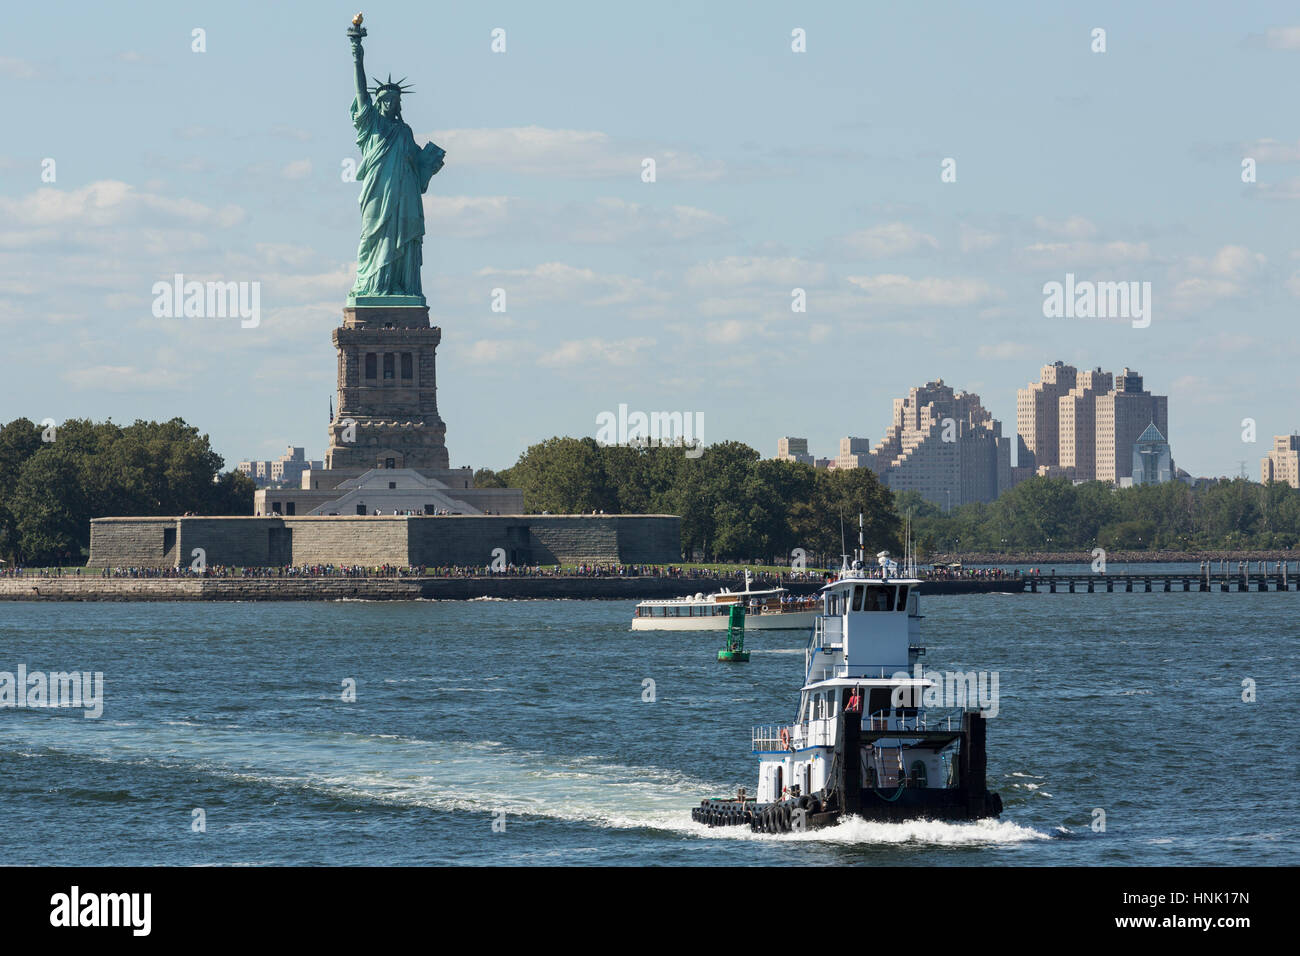 Statue of Liberty, view from the Staten Island Ferry. Aug, 2016. New York City, U.S.A. Stock Photo